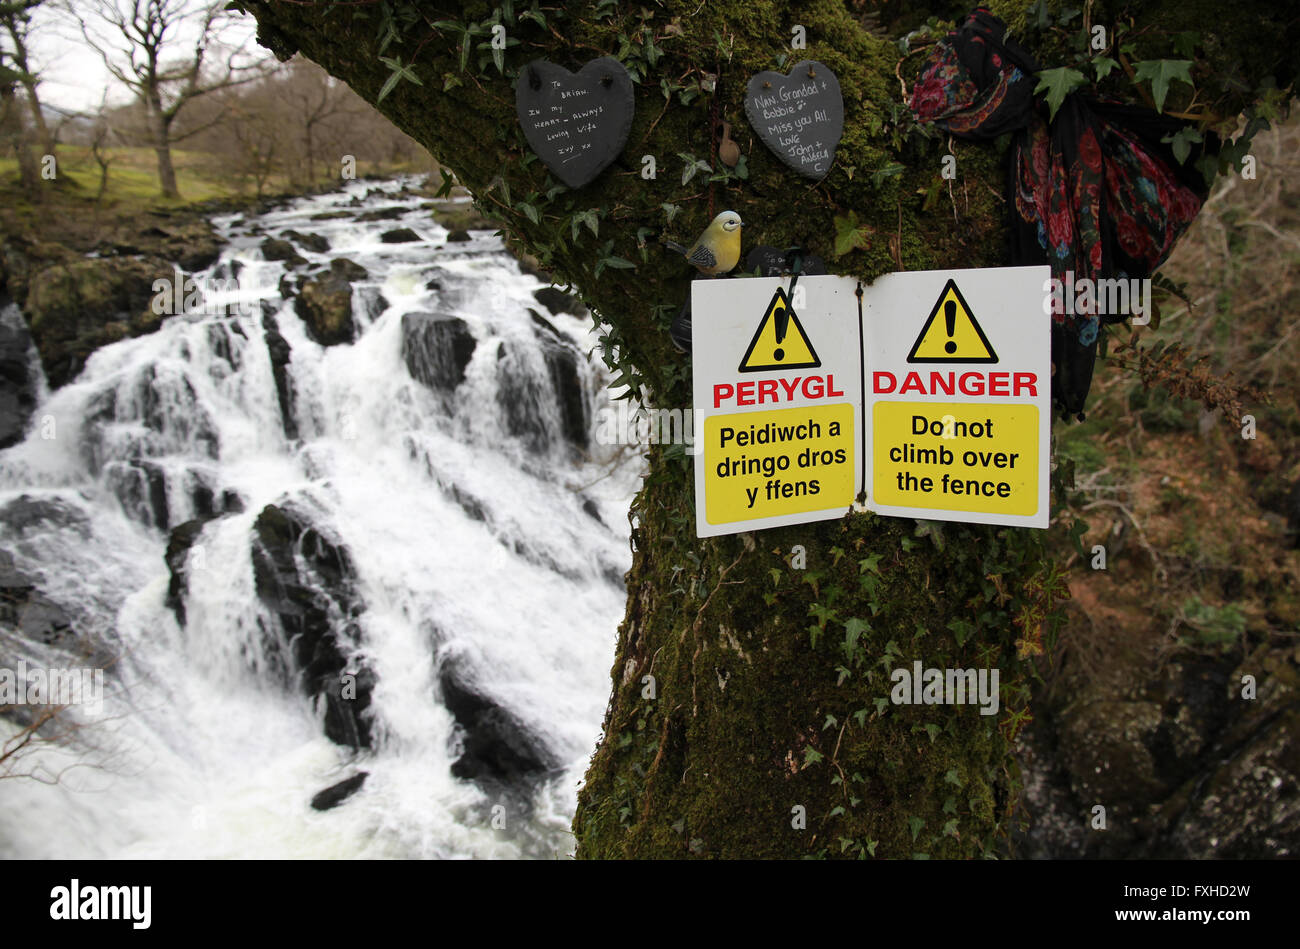 health and safety sign, Swallow Falls, Betws y Coed, Conwy, Wales Stock Photo